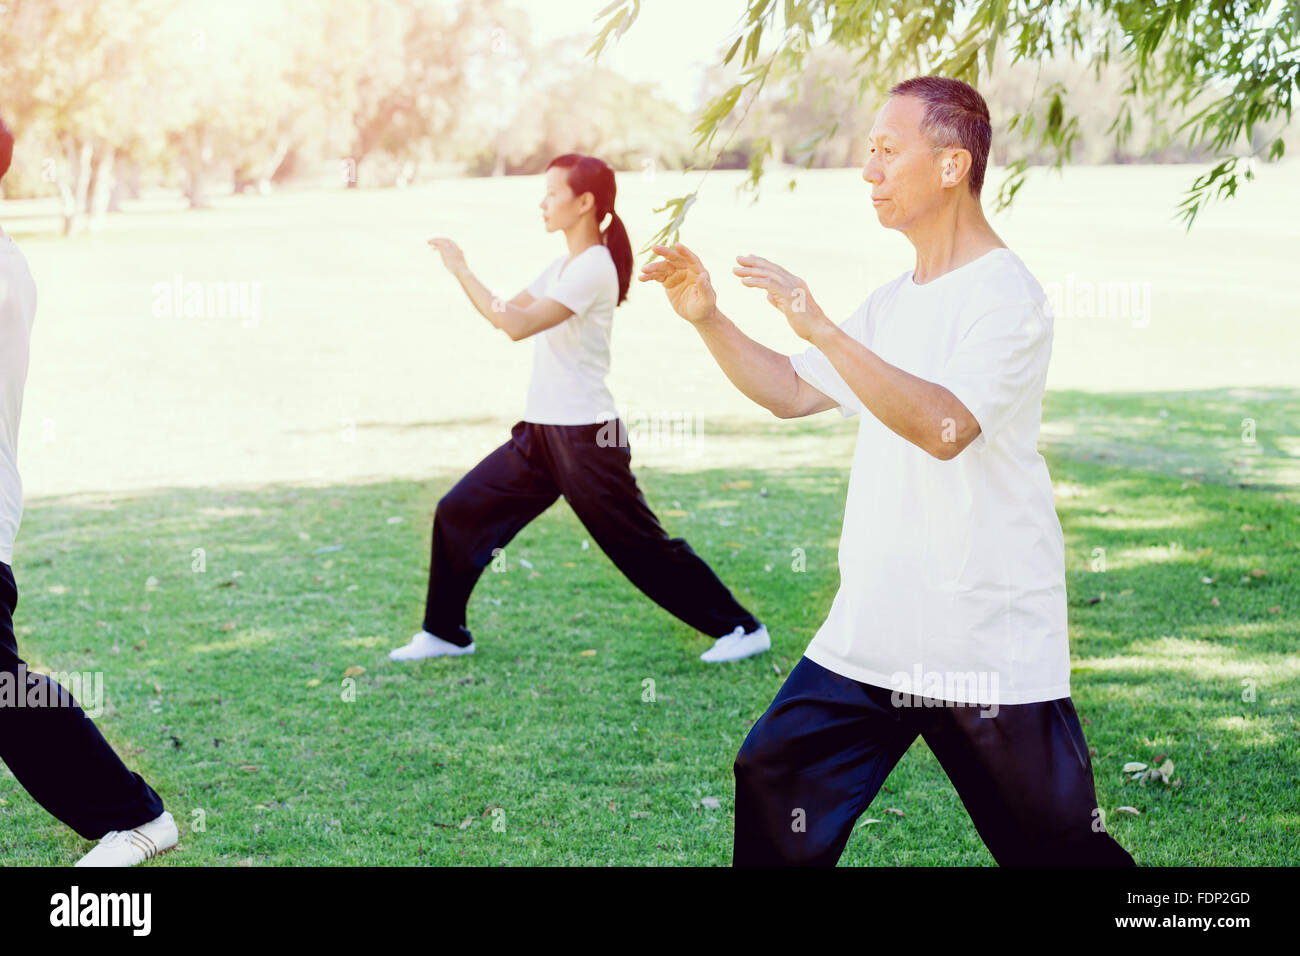 People practicing thai chi in the park in the summertime Stock Photo